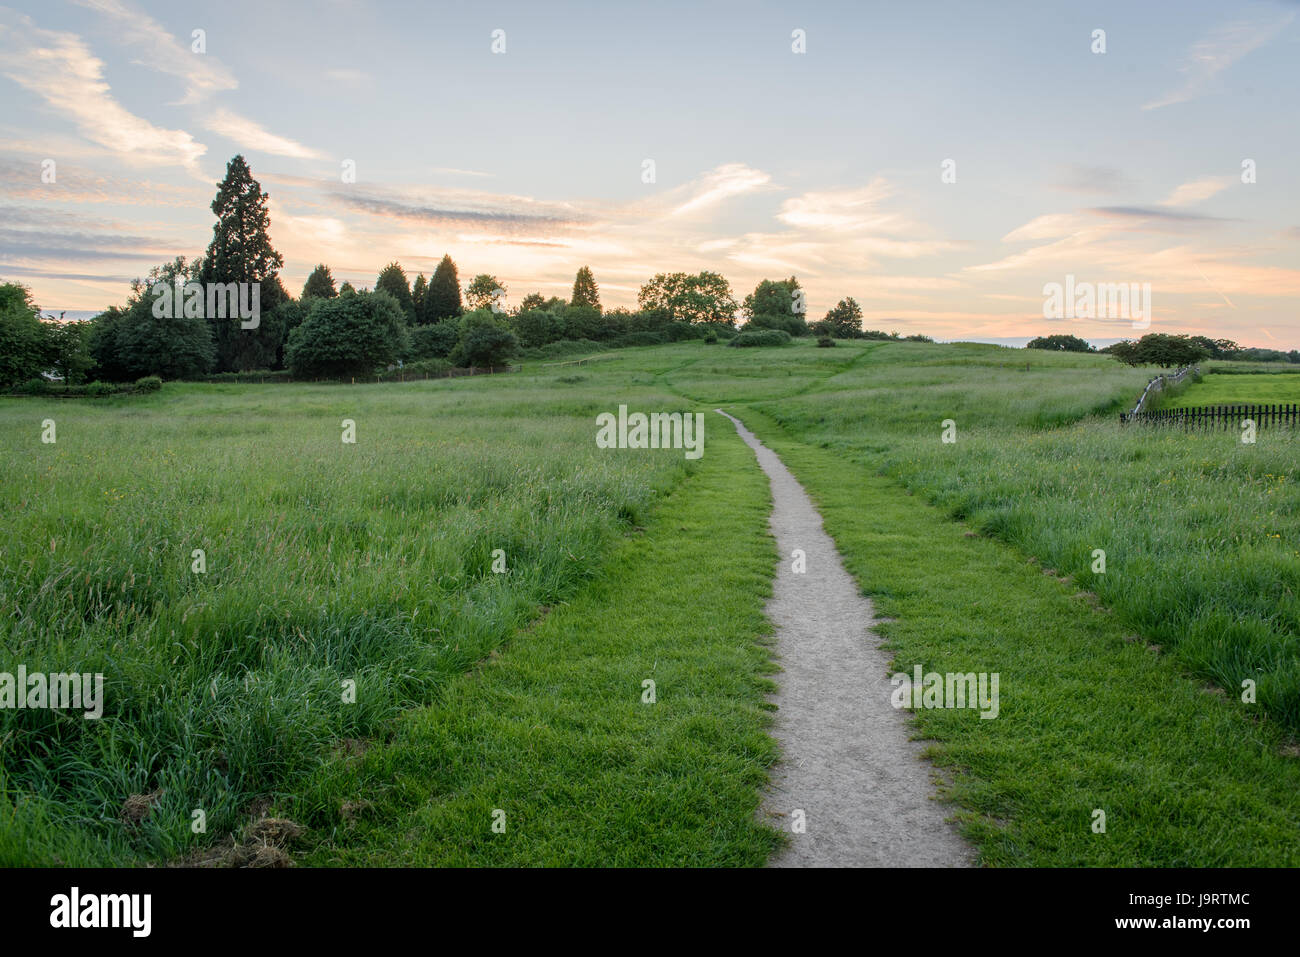 A path leading into the distance across a field with a moody sunset sky Stock Photo